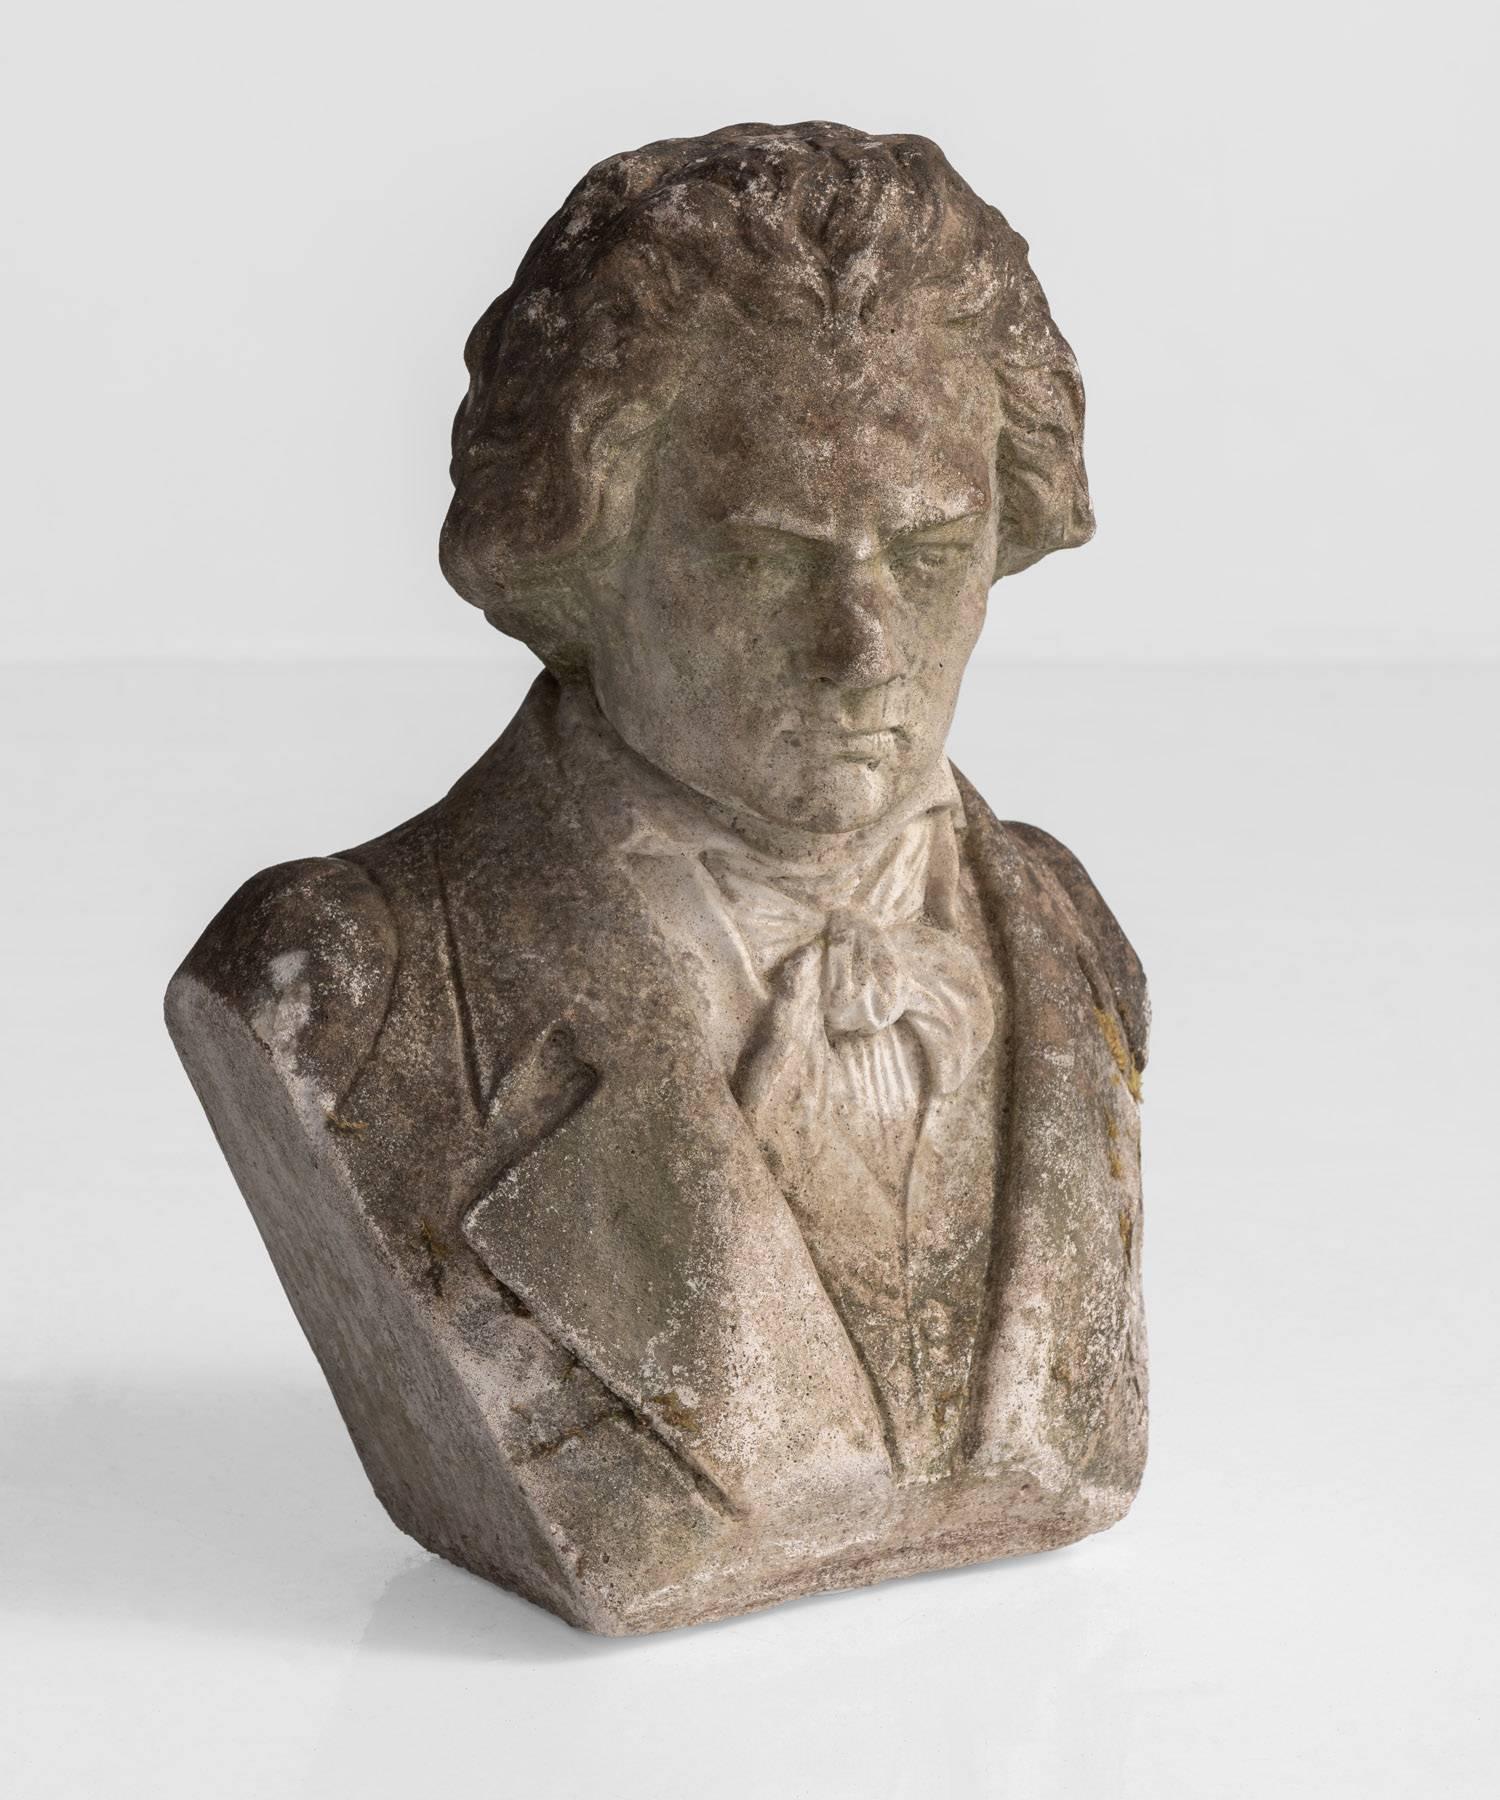 Reconstituted stone bust of Beethoven, circa 1960.

Smaller than lifesize portrait with beautifully weathered patina.